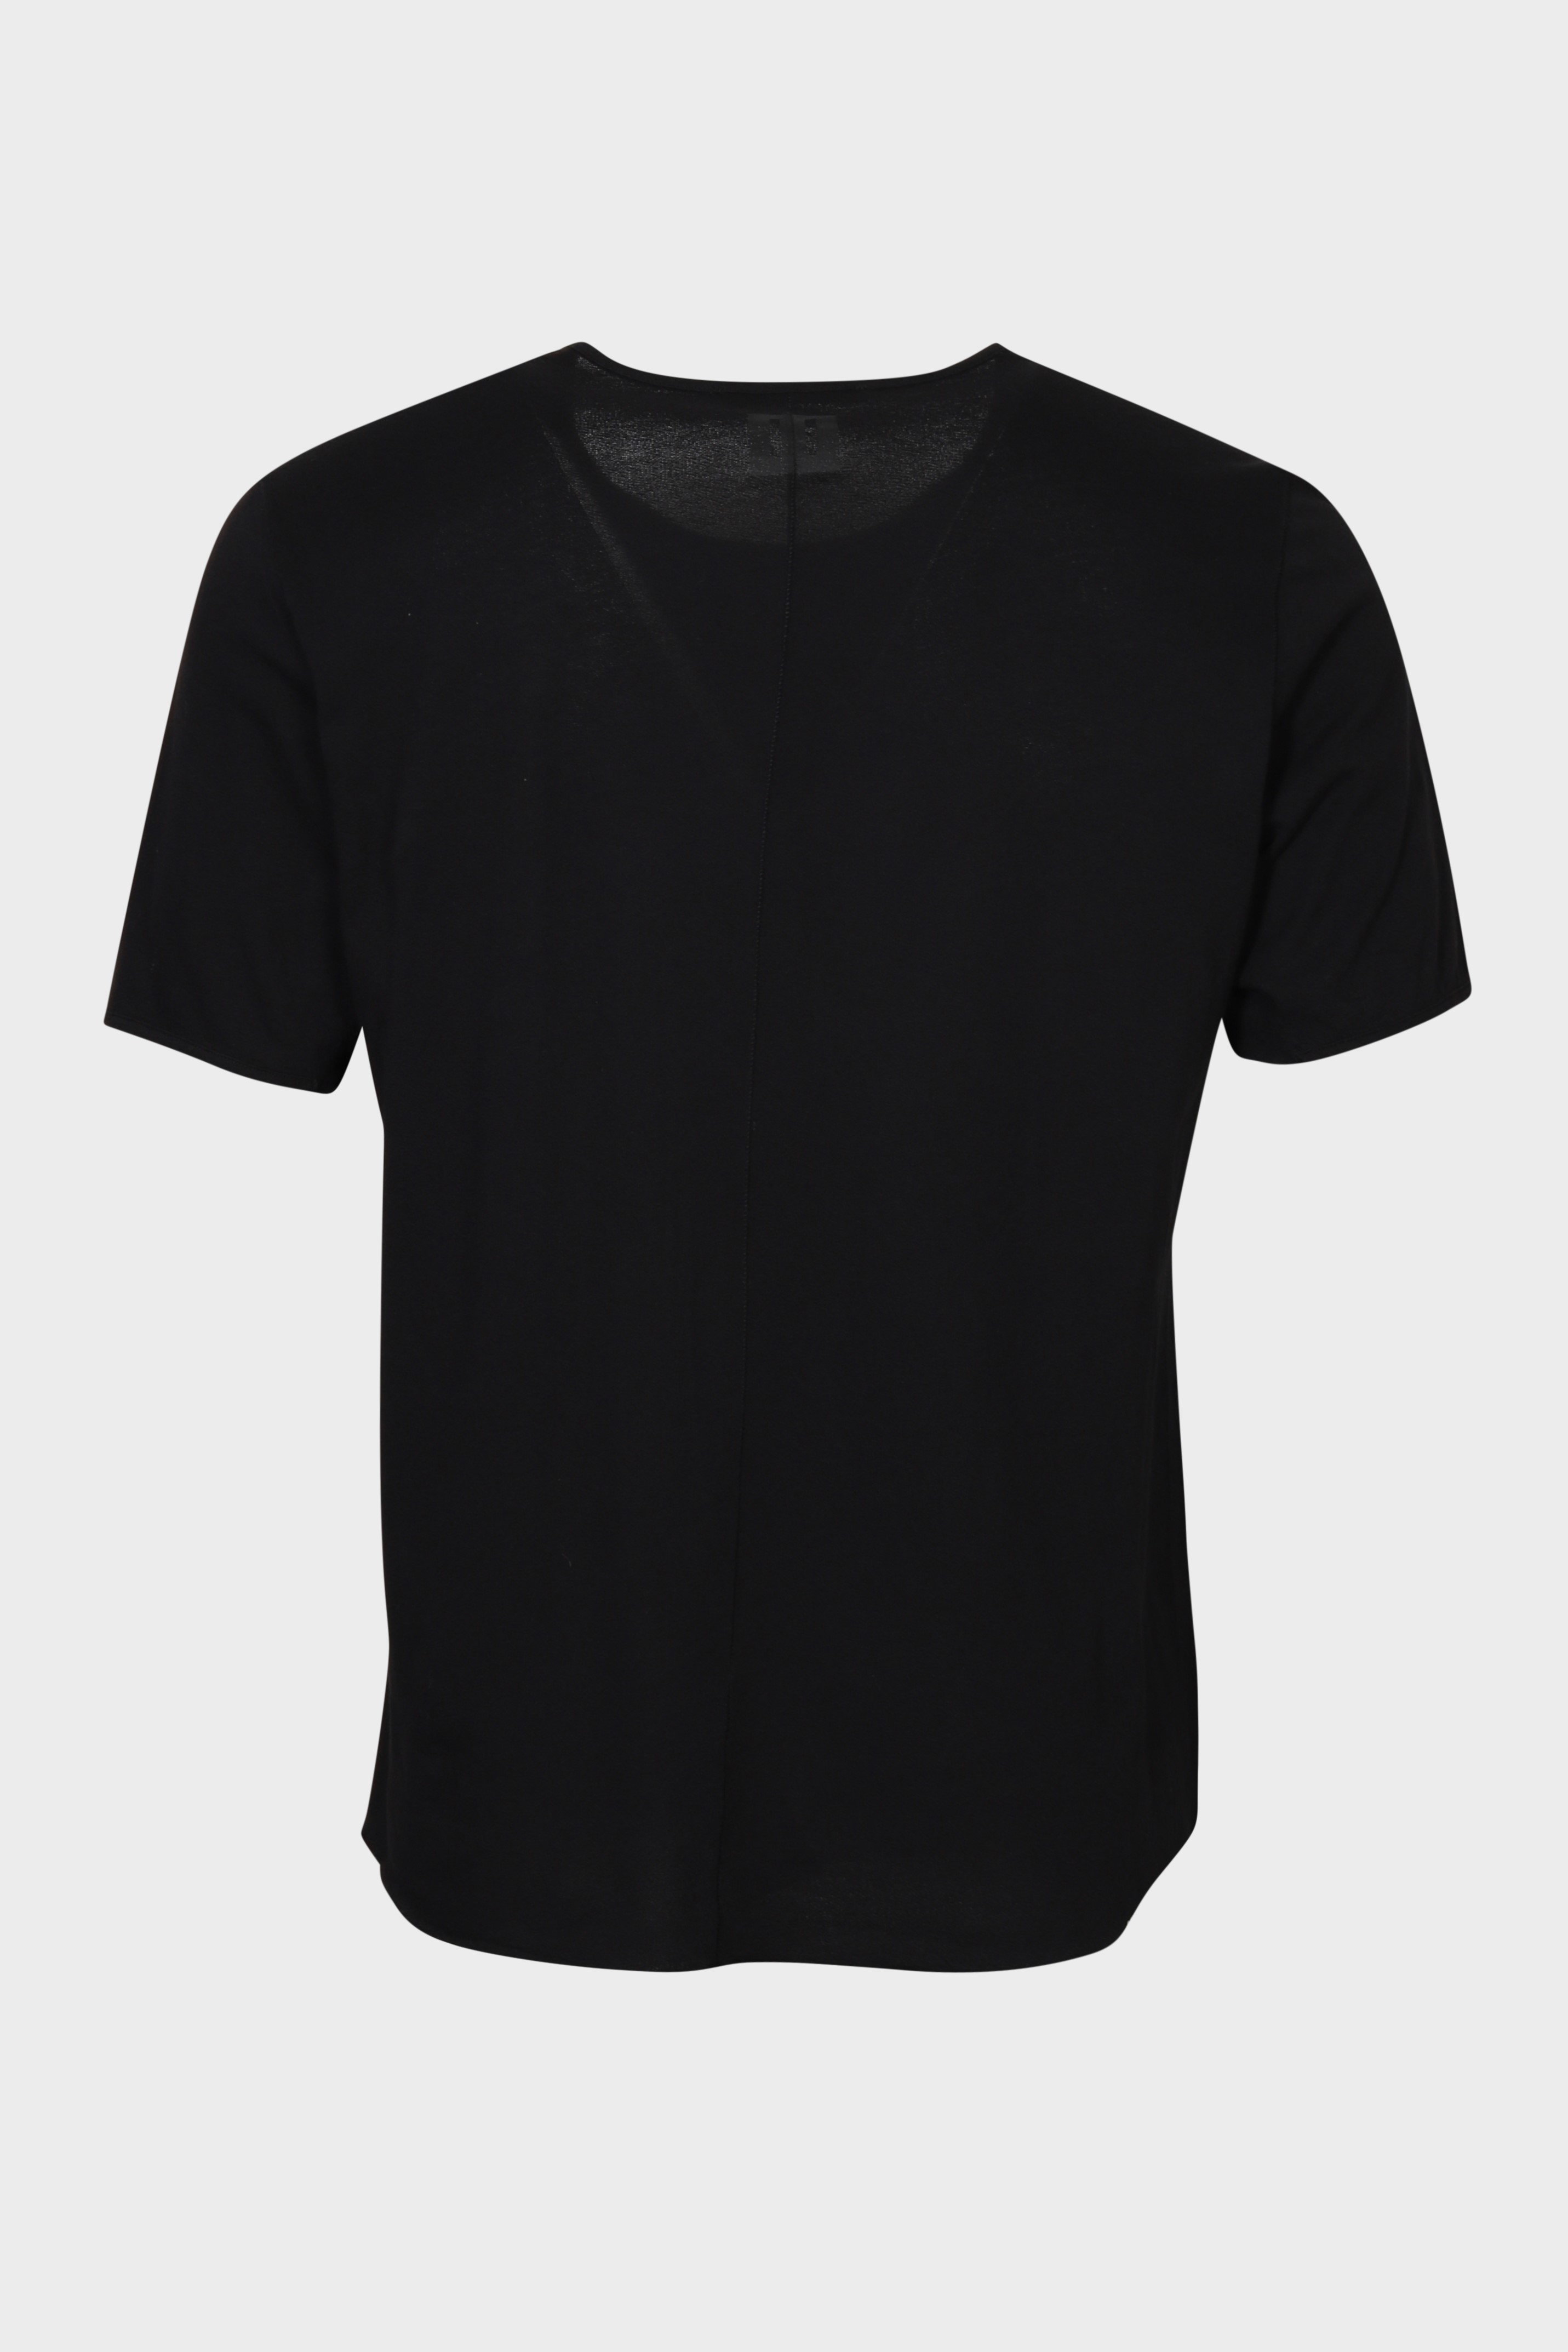 HANNES ROETHER T-Shirt in Black 3XL